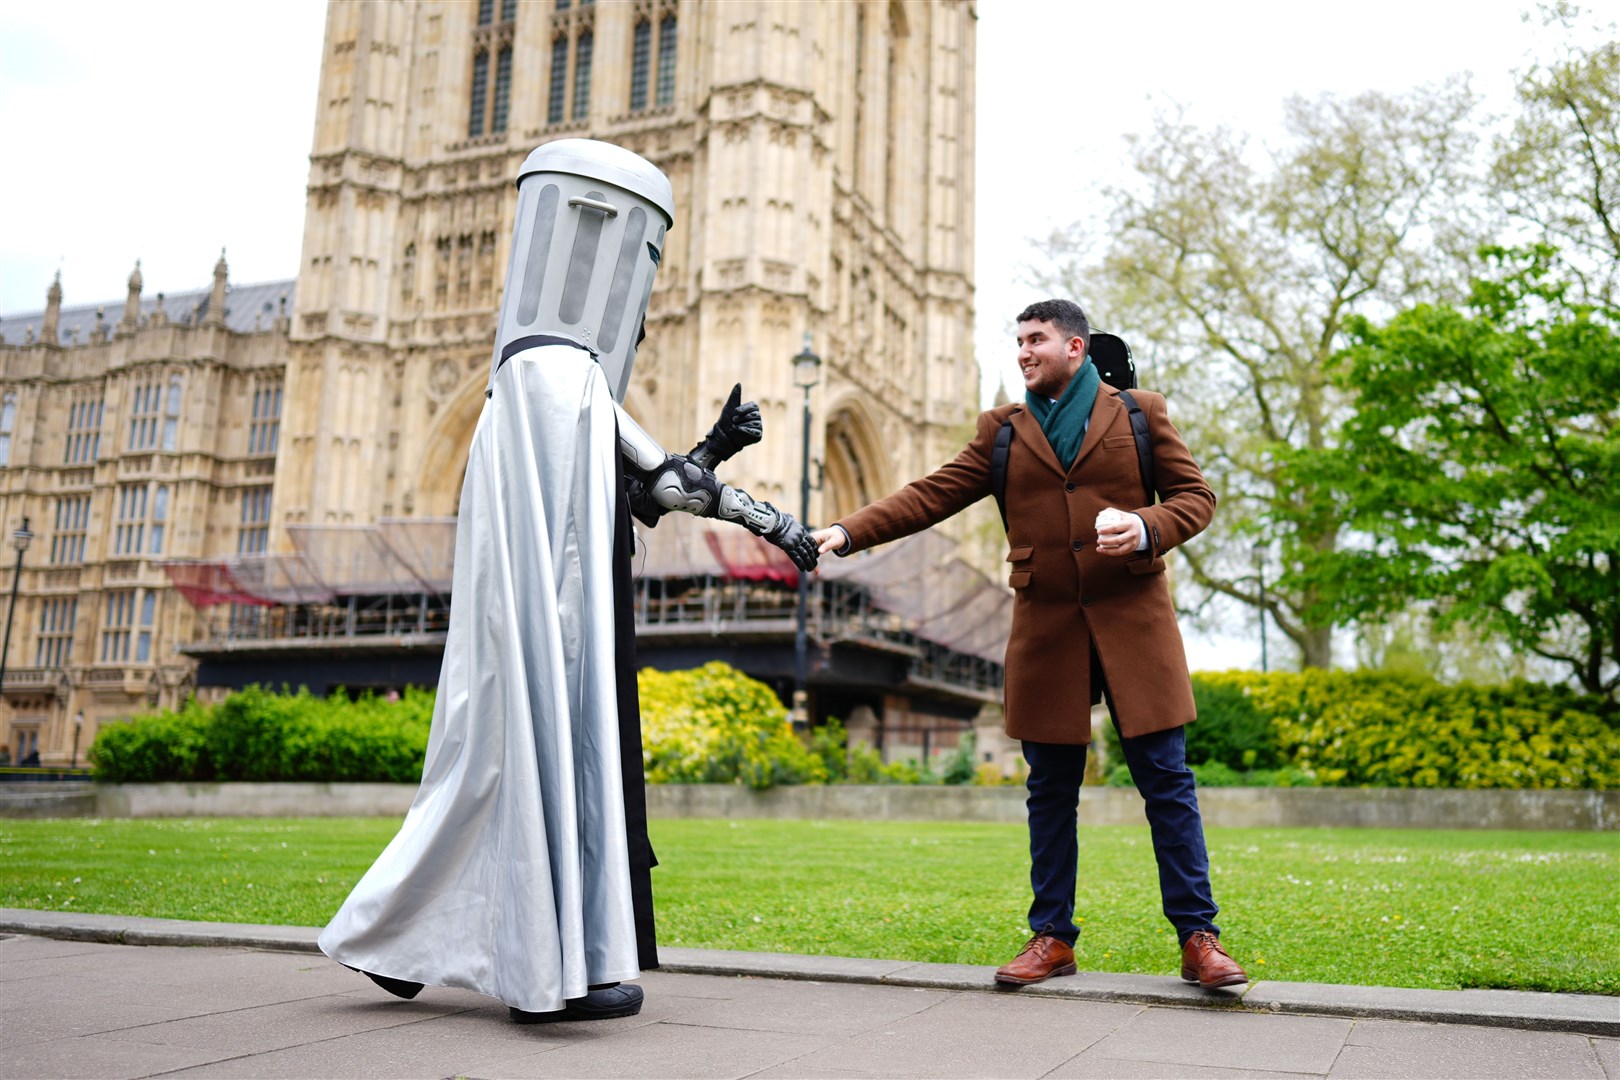 Mayor of London election candidate Count Binface greets an admirer outside Parliament (Aaron Chown/PA)